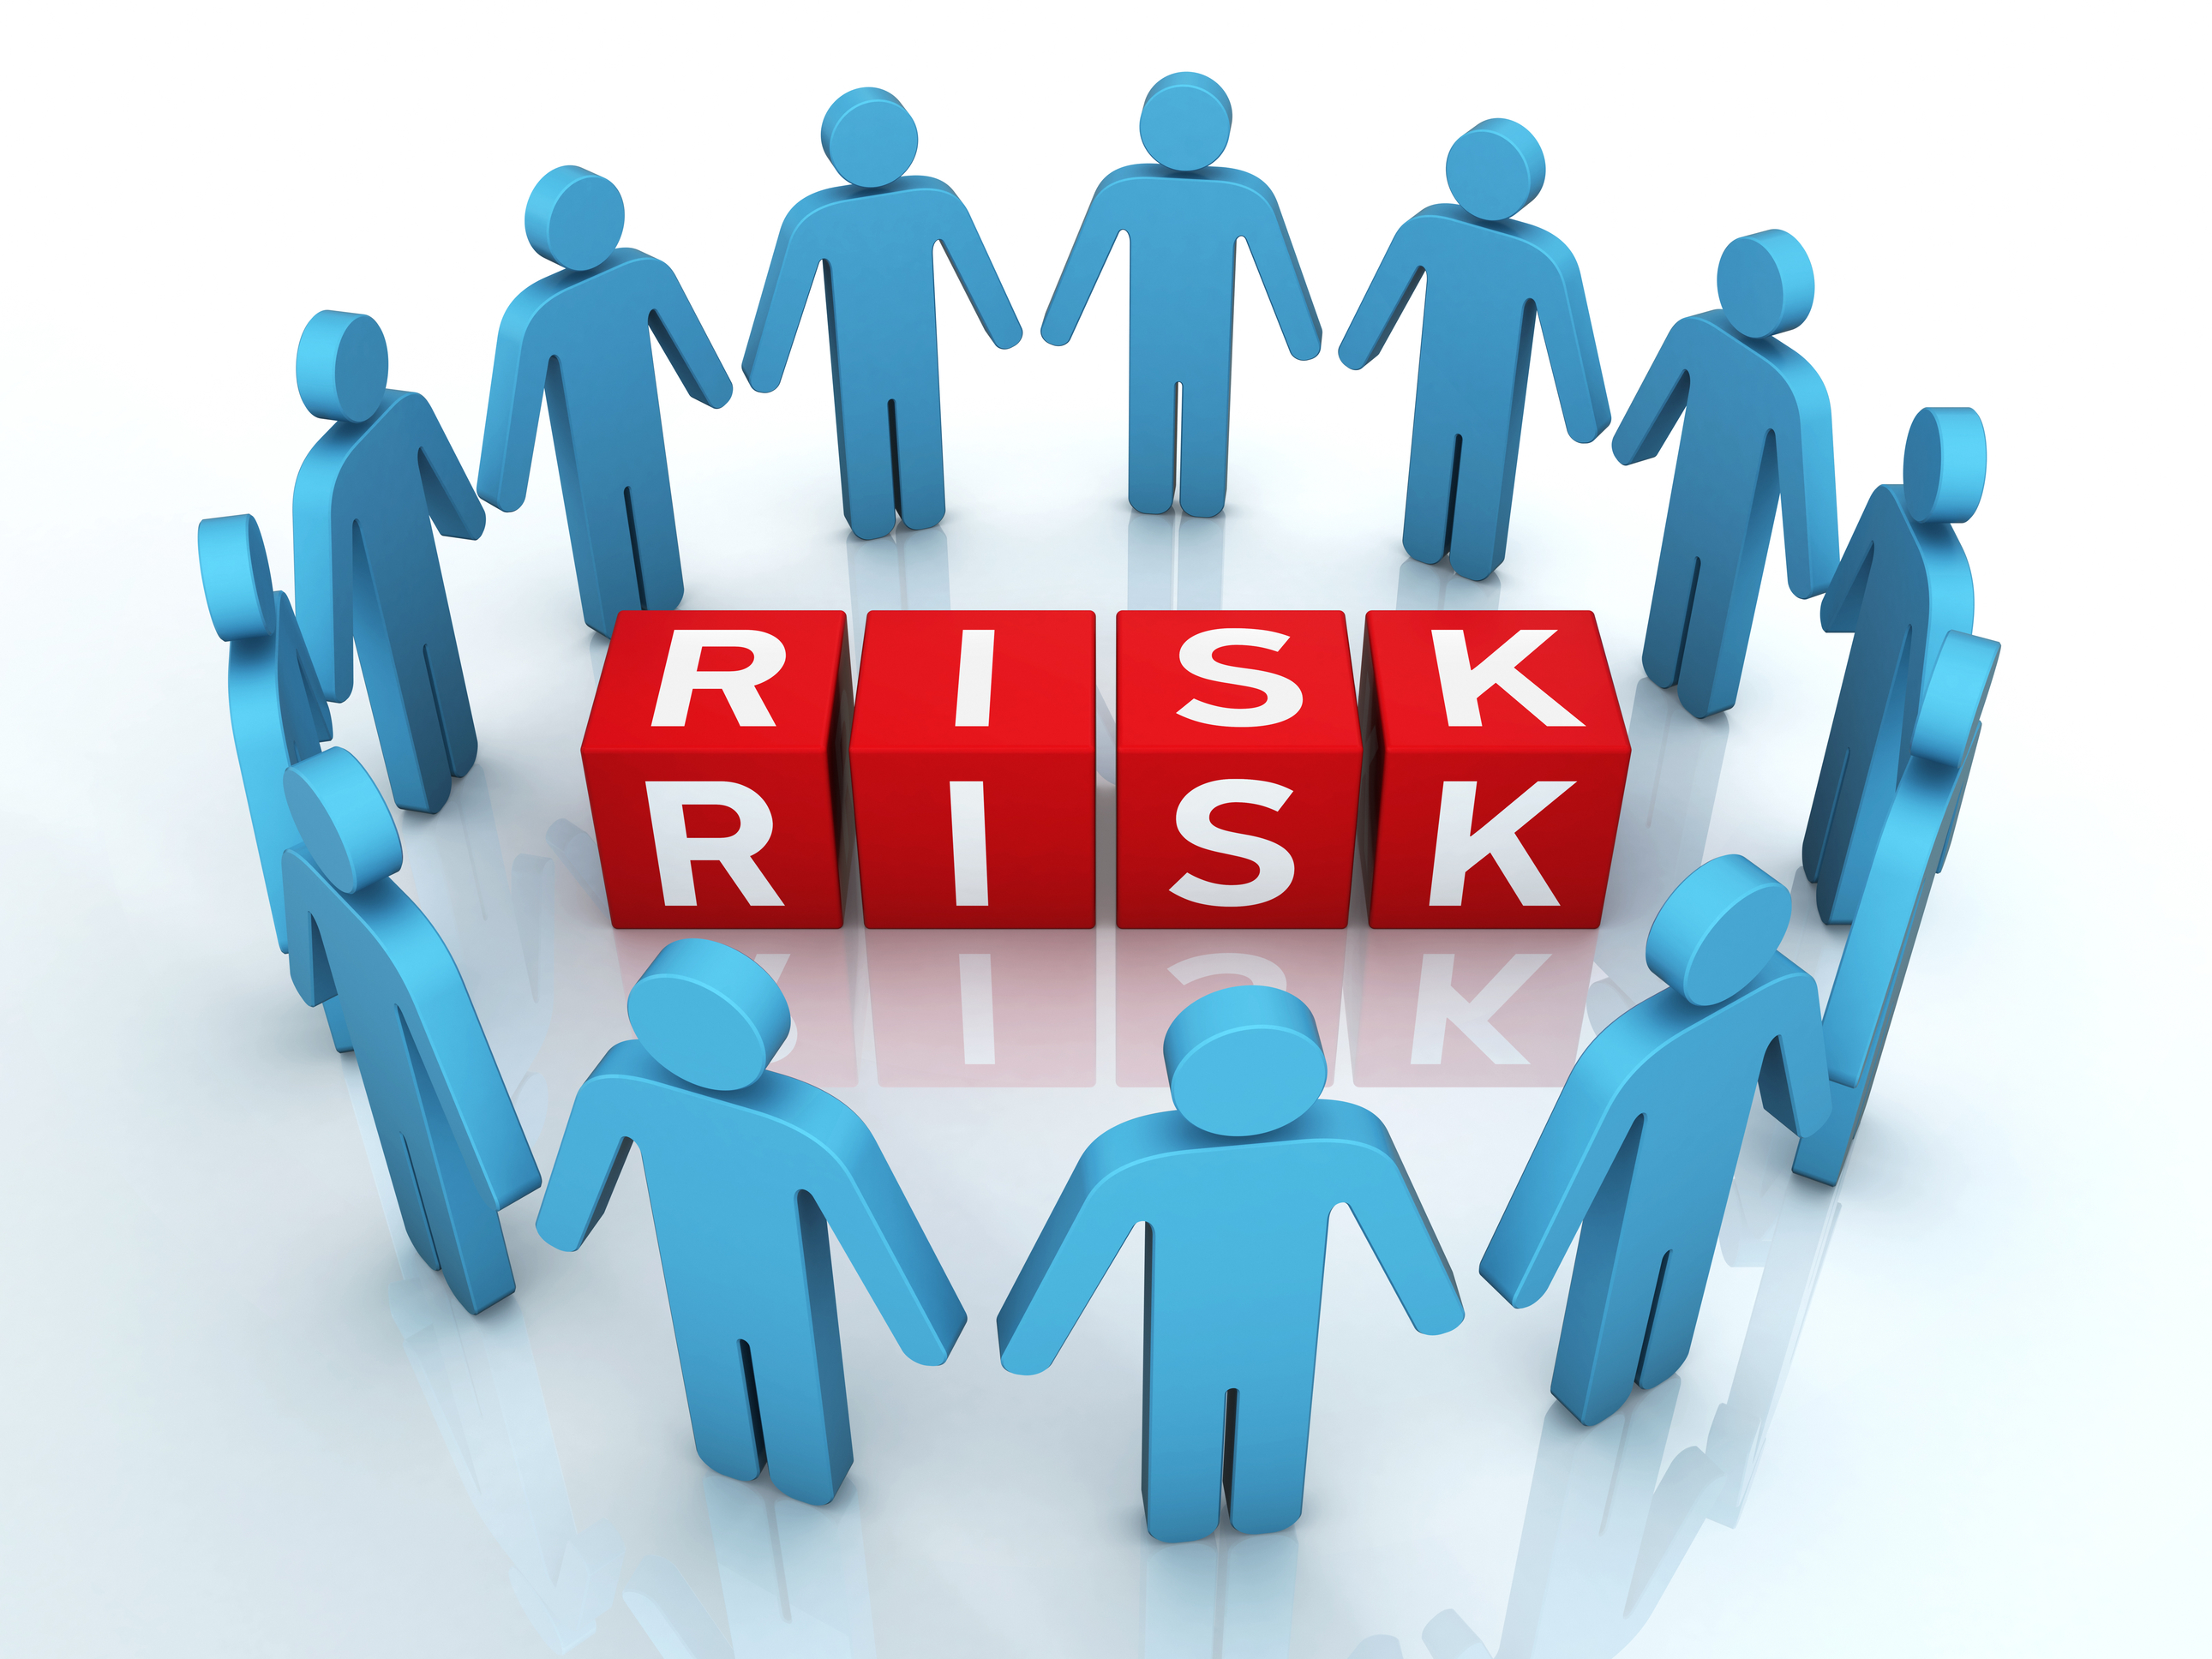 What are the Components of Risk?